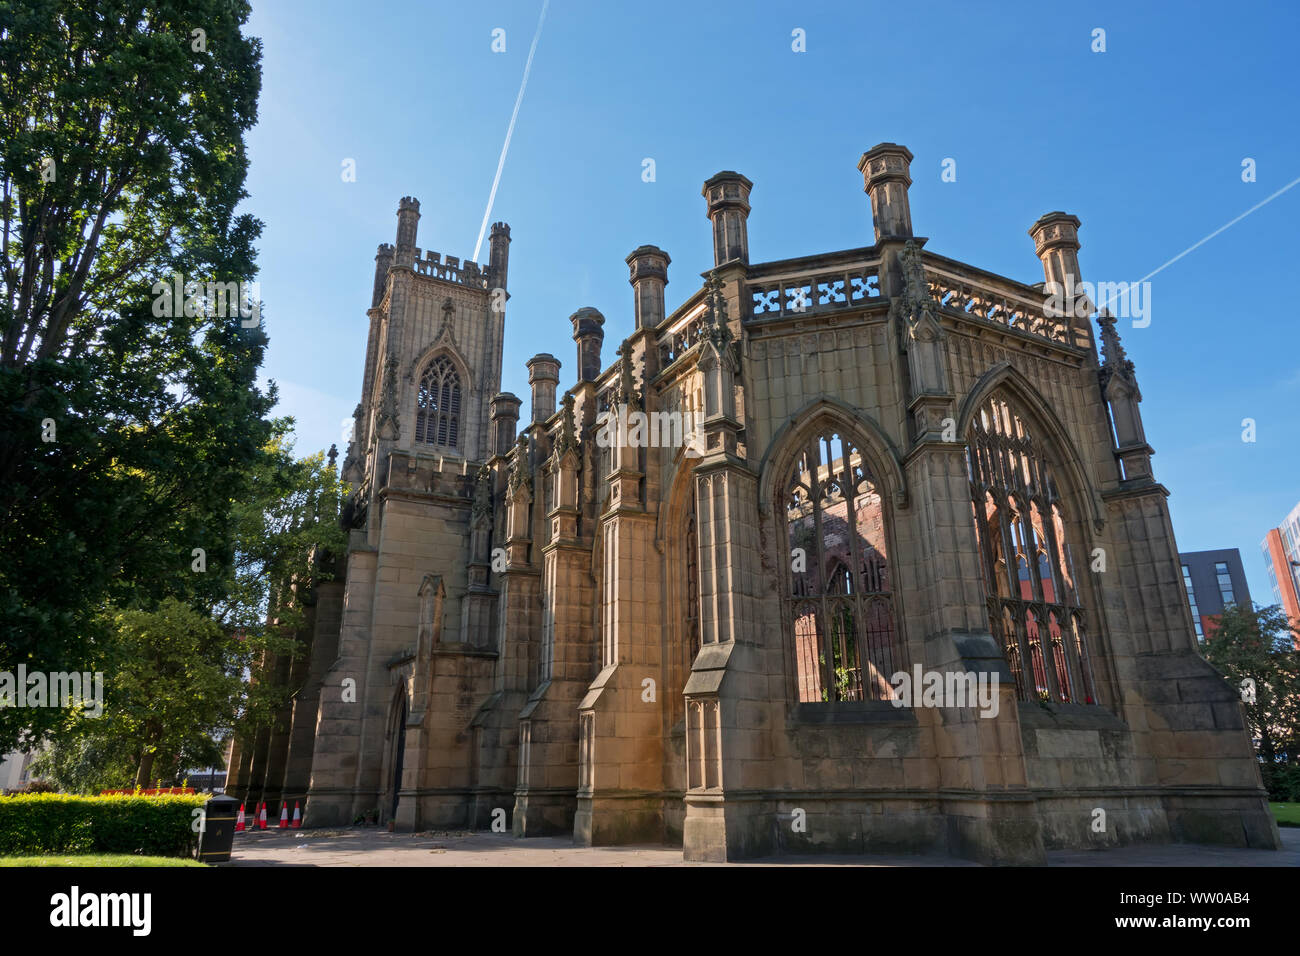 St Luke's Church, known as the bombed-out church, is a former Anglican parish church in Liverpool, England. badly damaged by bombs during the War. Stock Photo